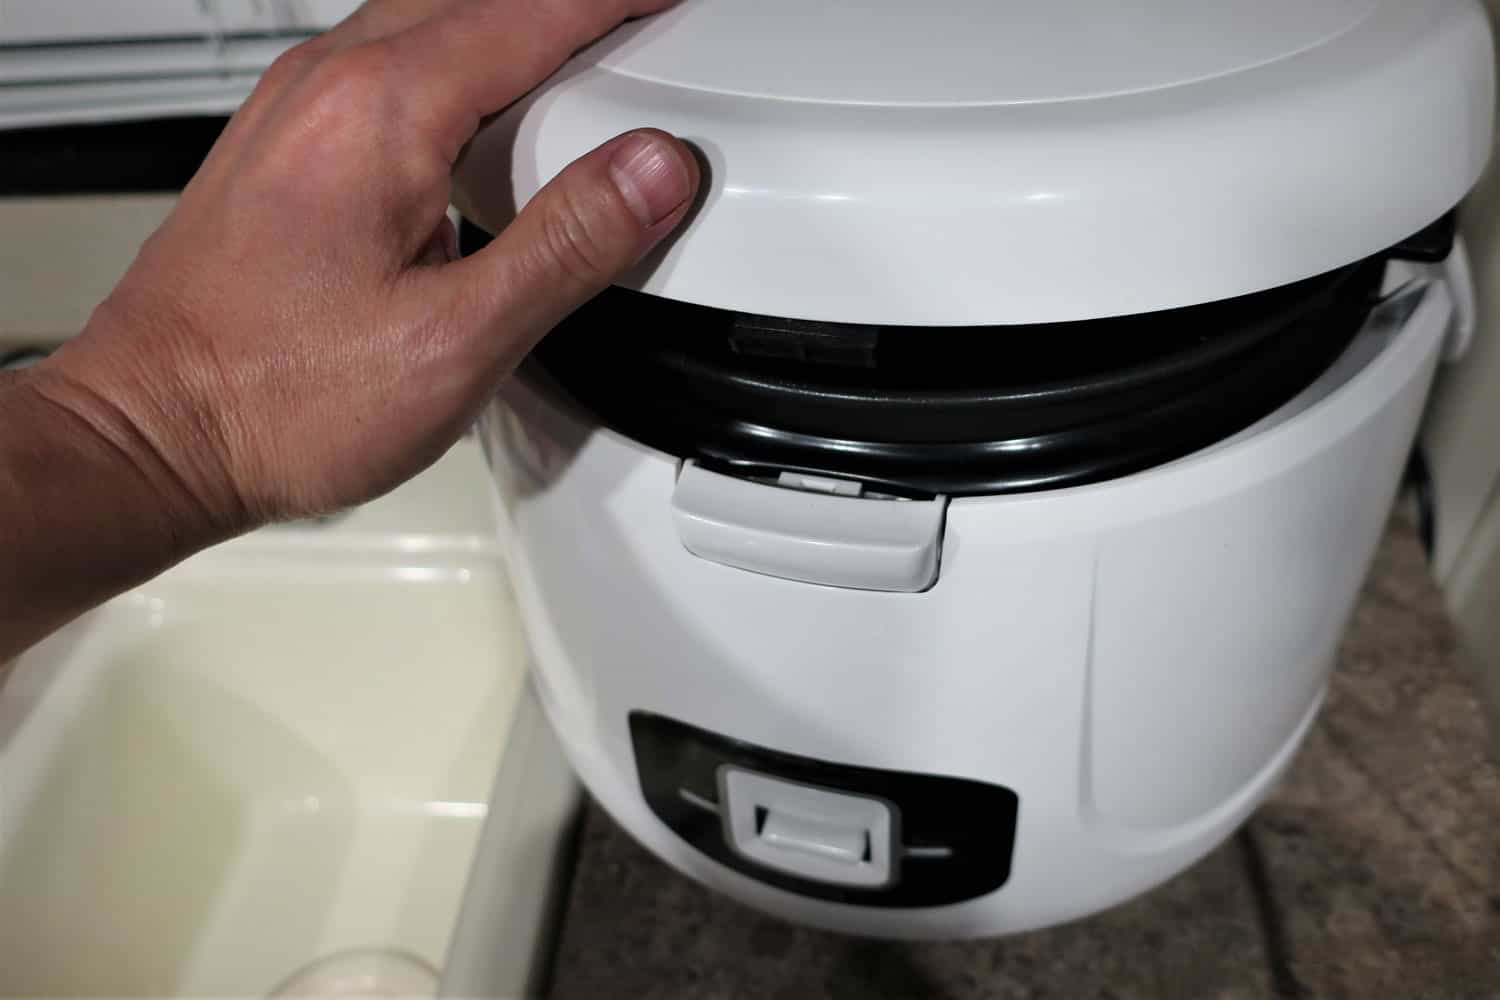 A rice cooker on the kitchen countertop